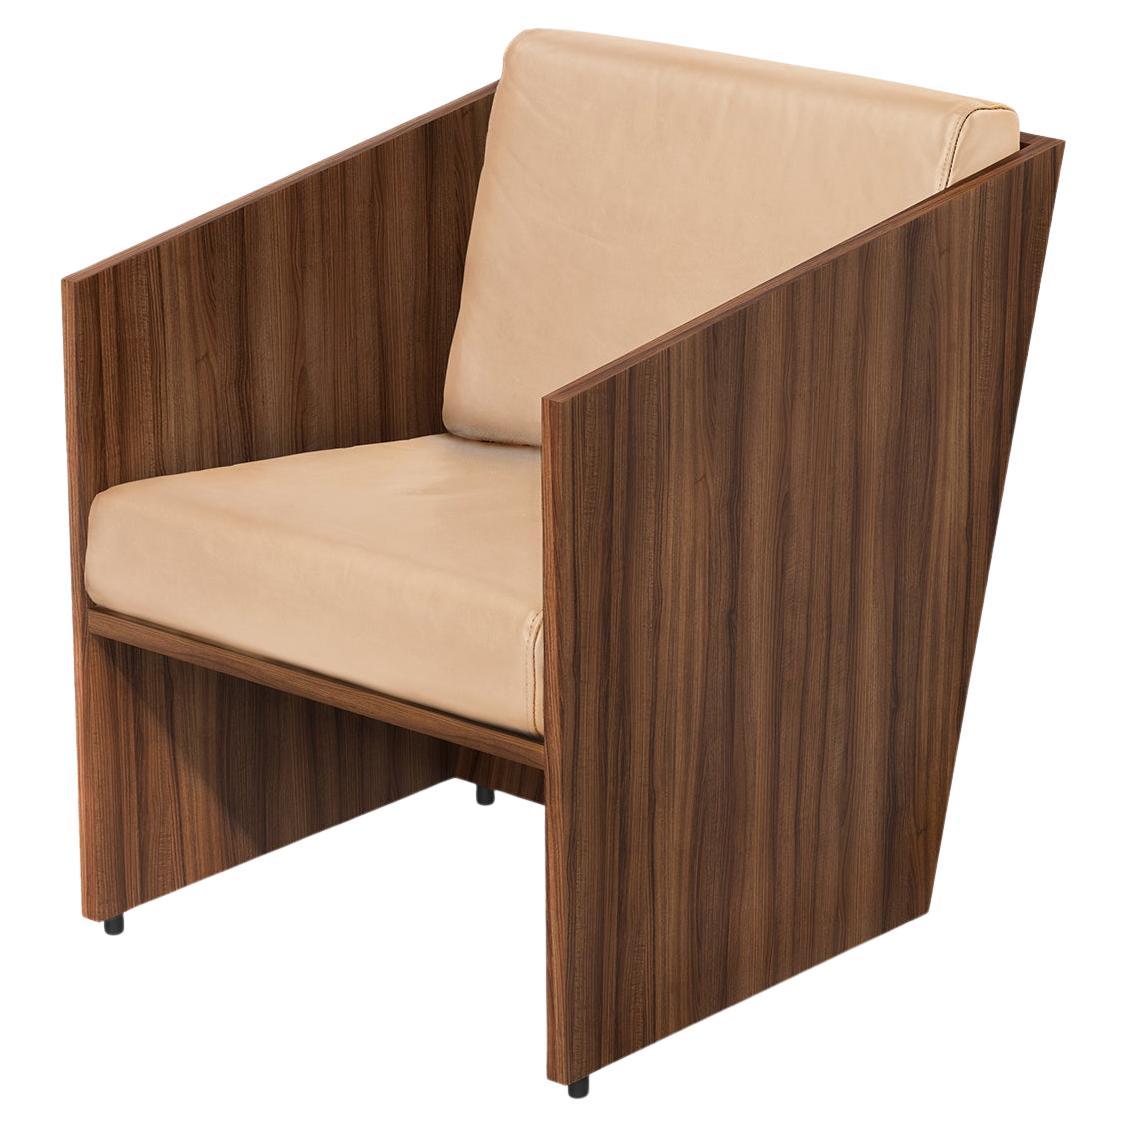 Álvaro Siza Vieira - Armchair in Walnut Wood and Natural Leather - one of a kind For Sale